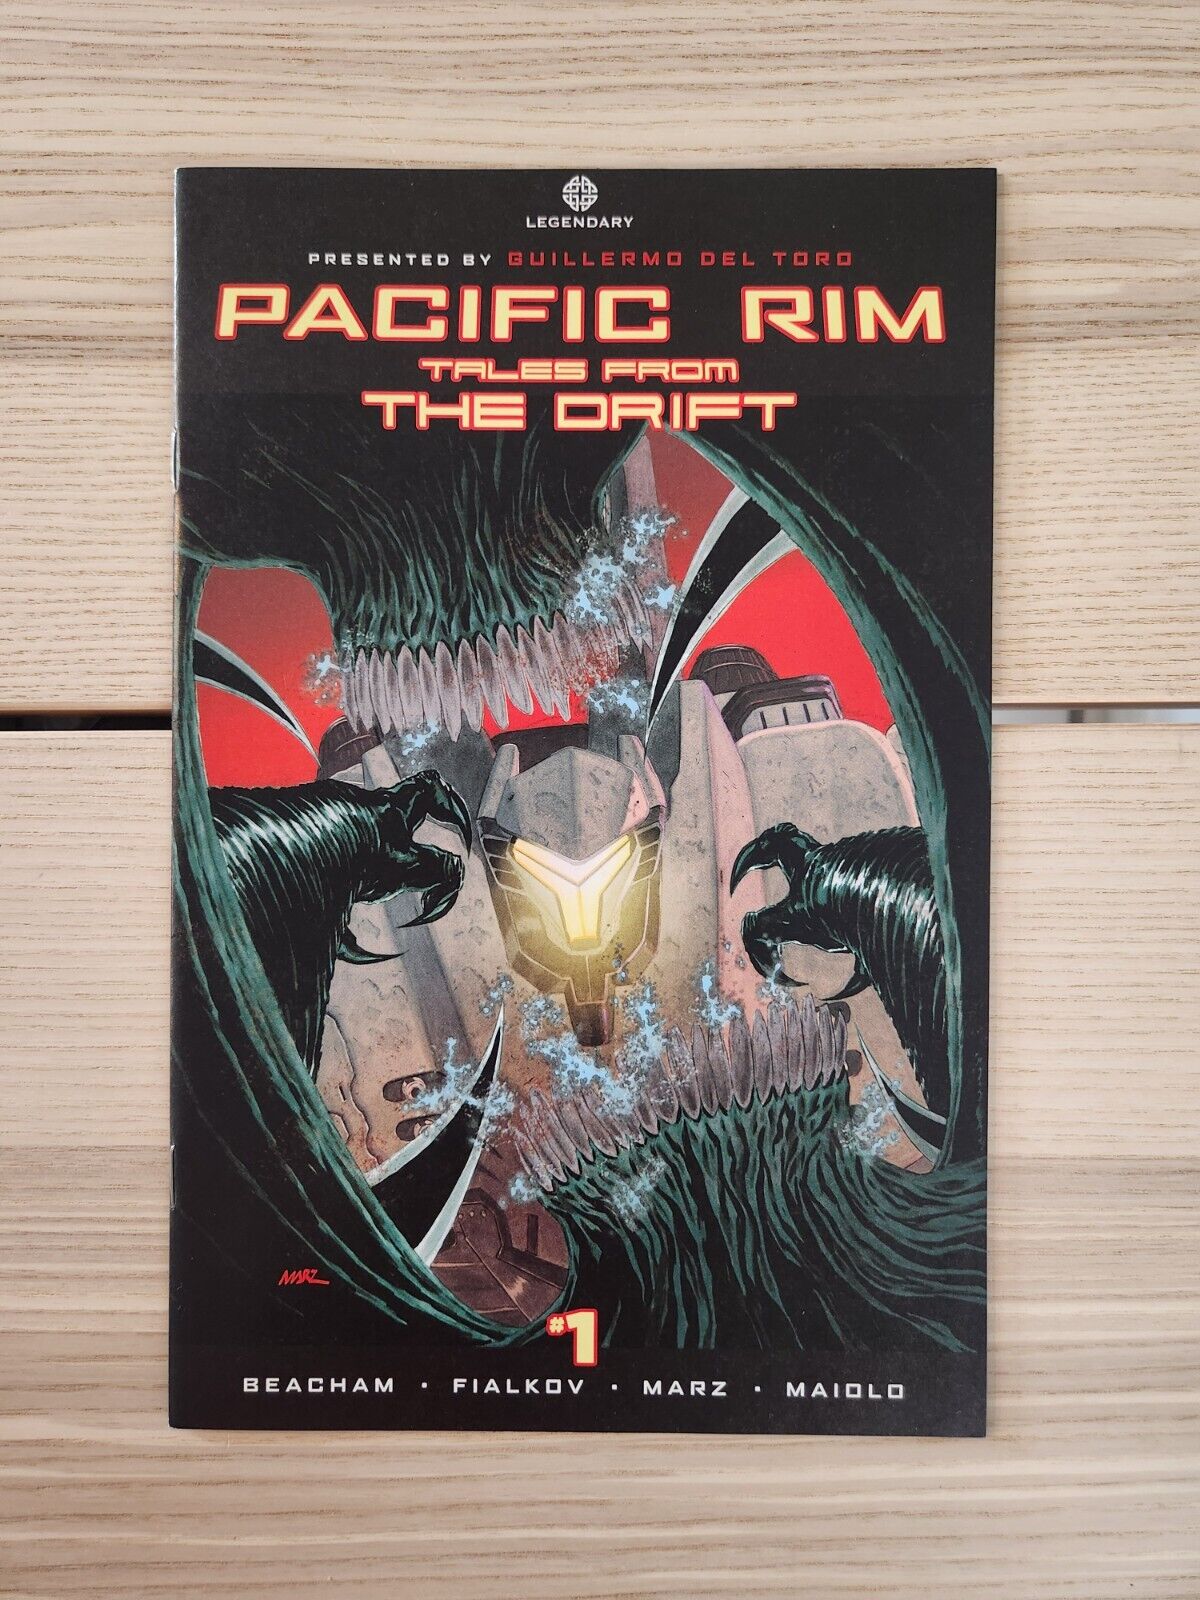 Pacific Rim Tales From the Drift #1 Cover A Legendary Comics 2015 High Grade